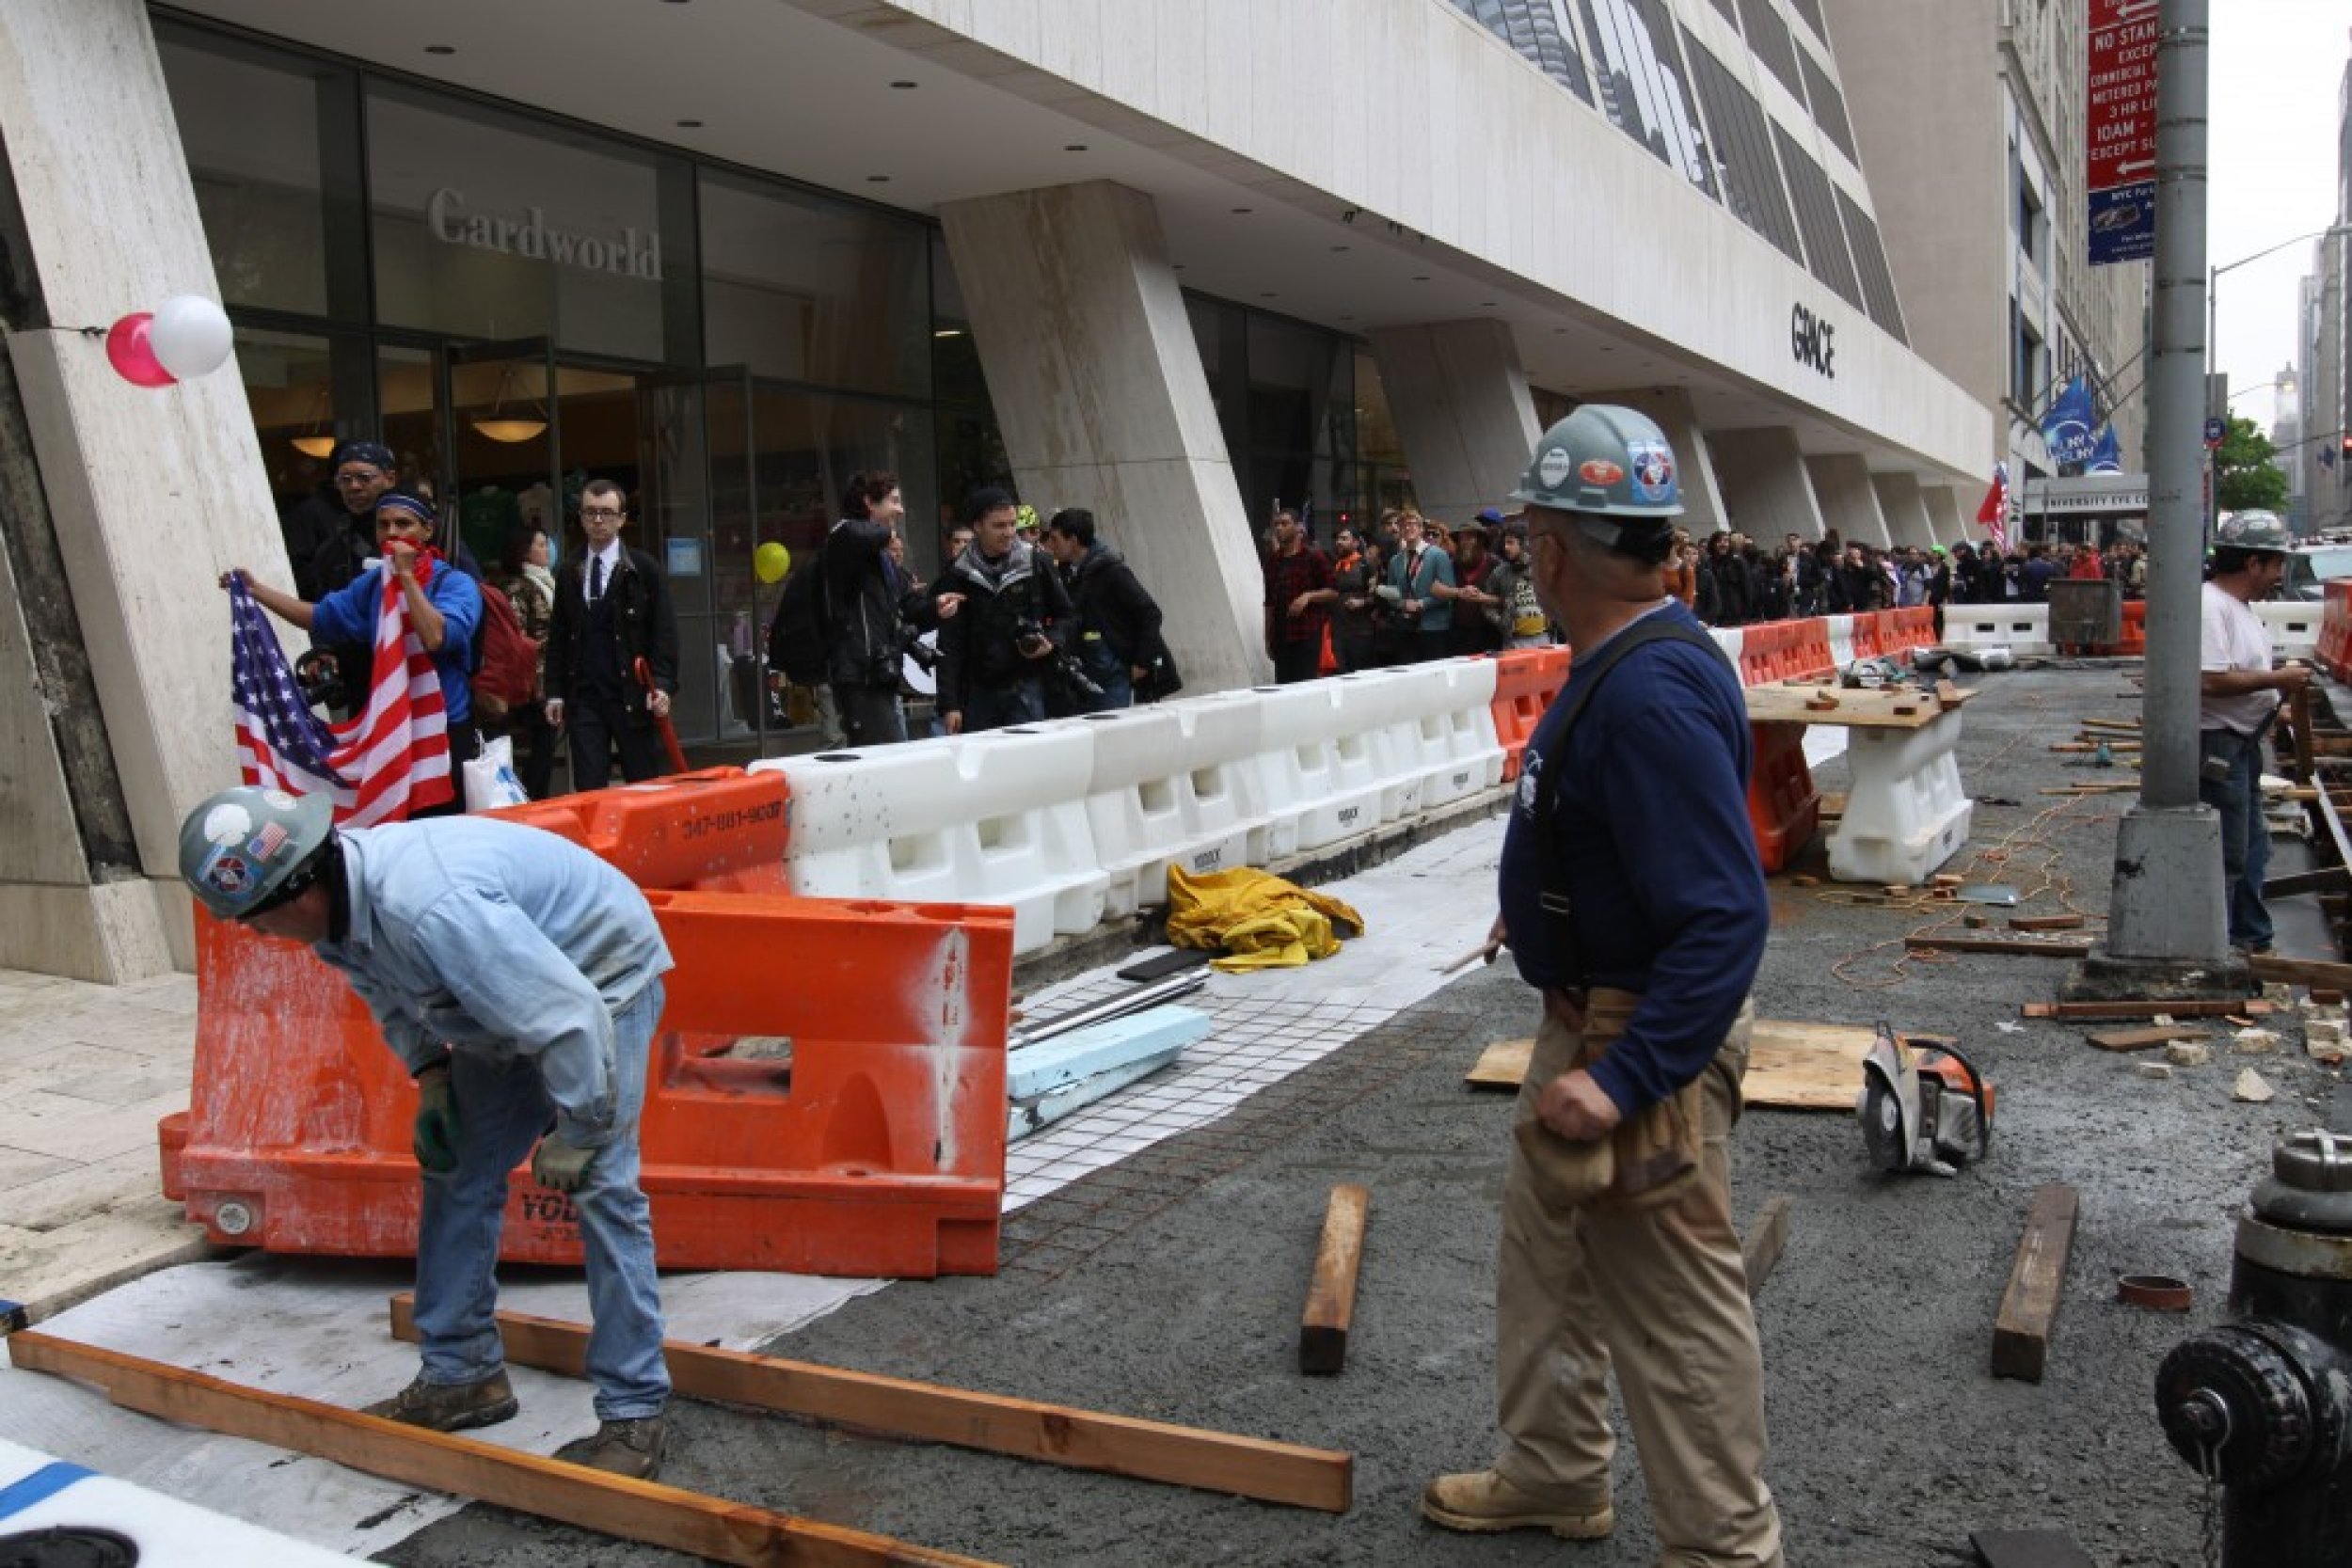 Most onlookers either ignored or offered faint praise to the demonstrators. Above, two constructions workers on East 42nd Street pause their work to observe the march go by them.